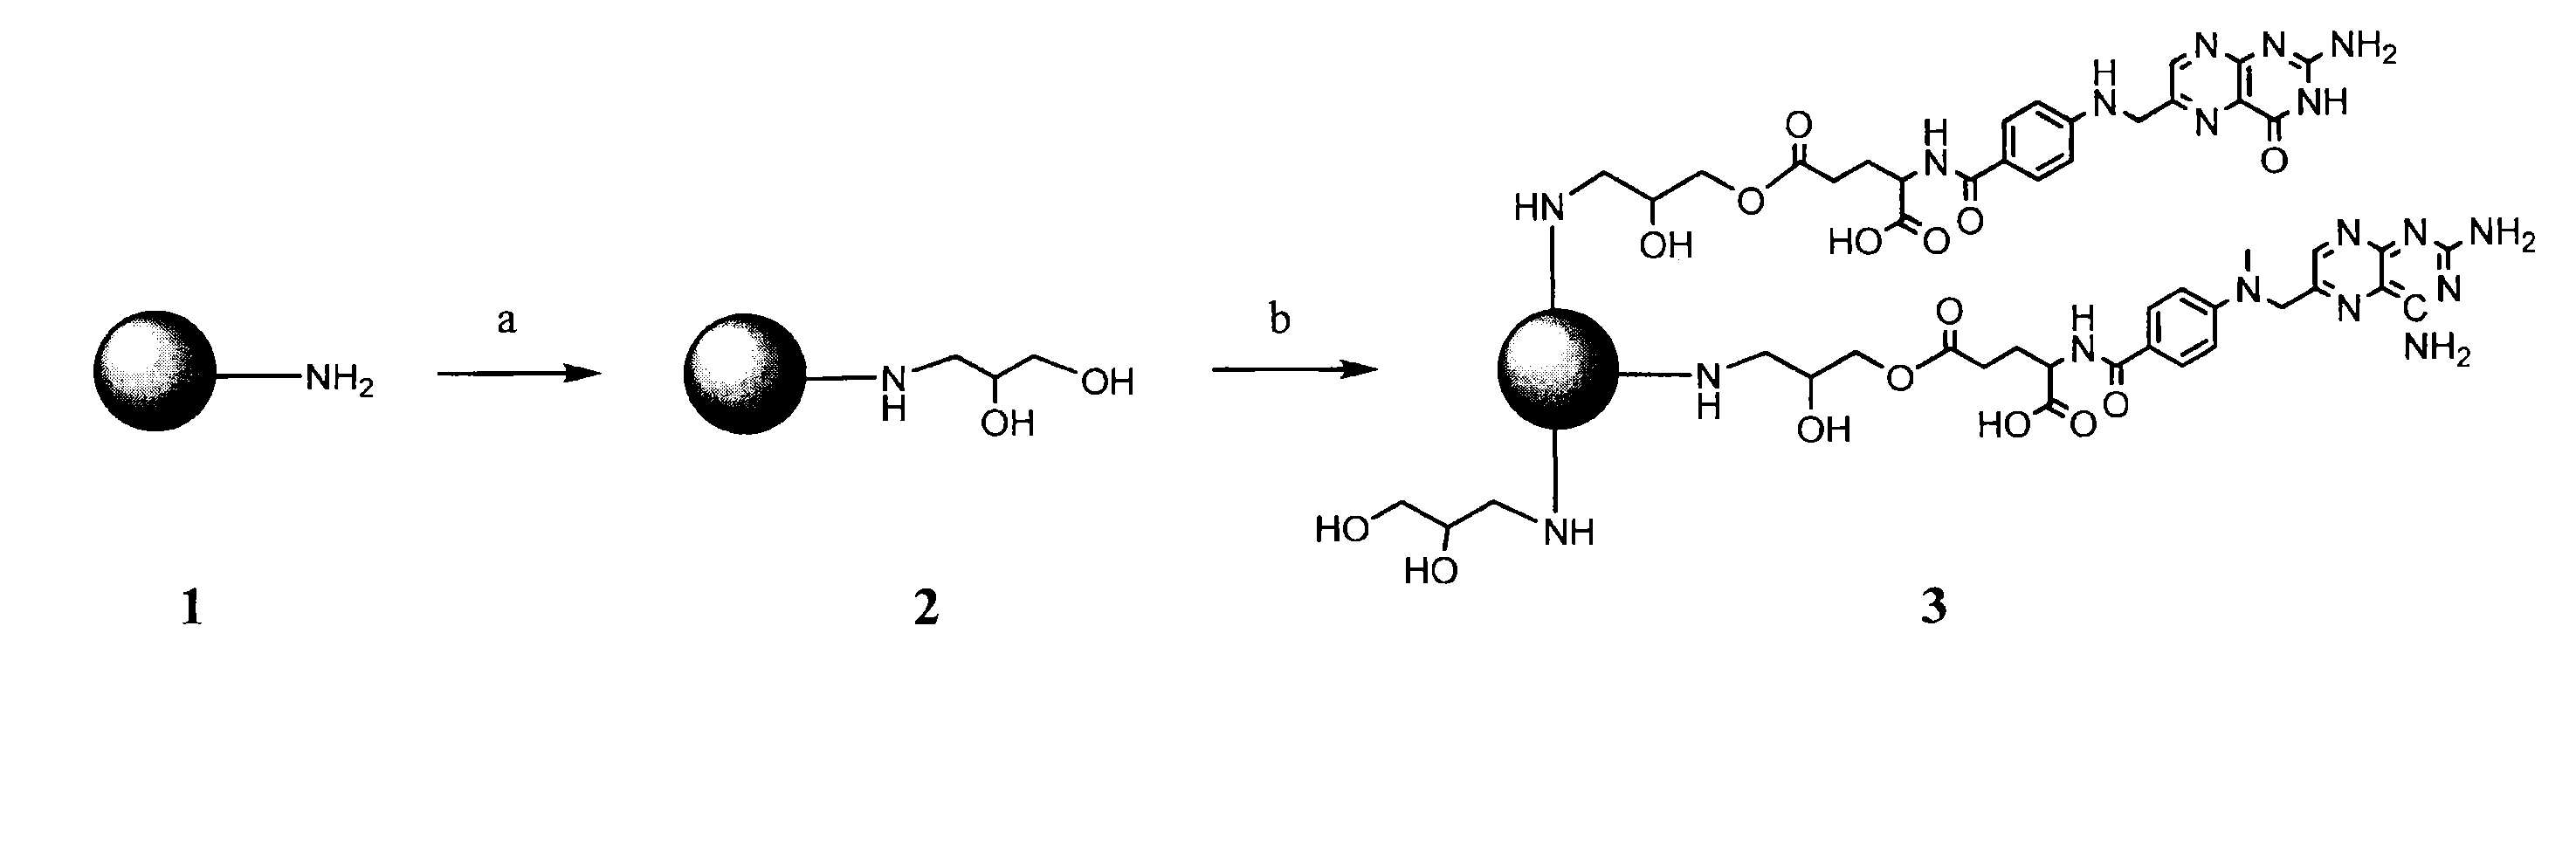 Synthesis of dendrimer conjugates